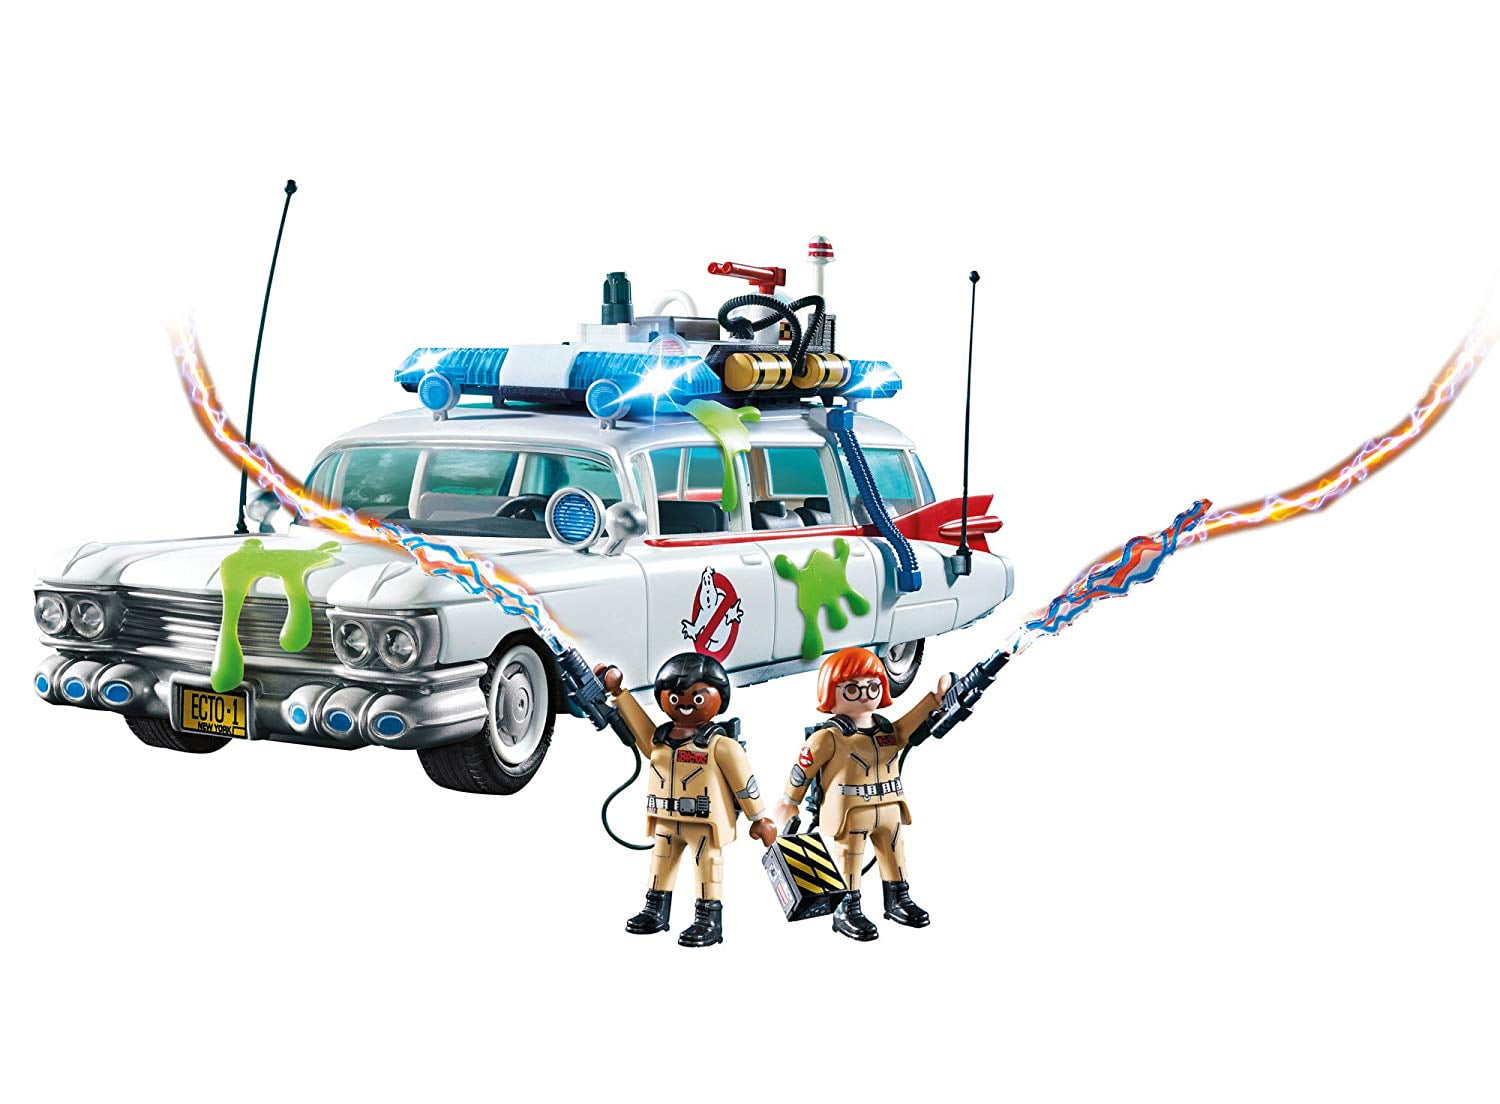 PLAYMOBIL 9220 Ghostbusters™ Ecto-1 